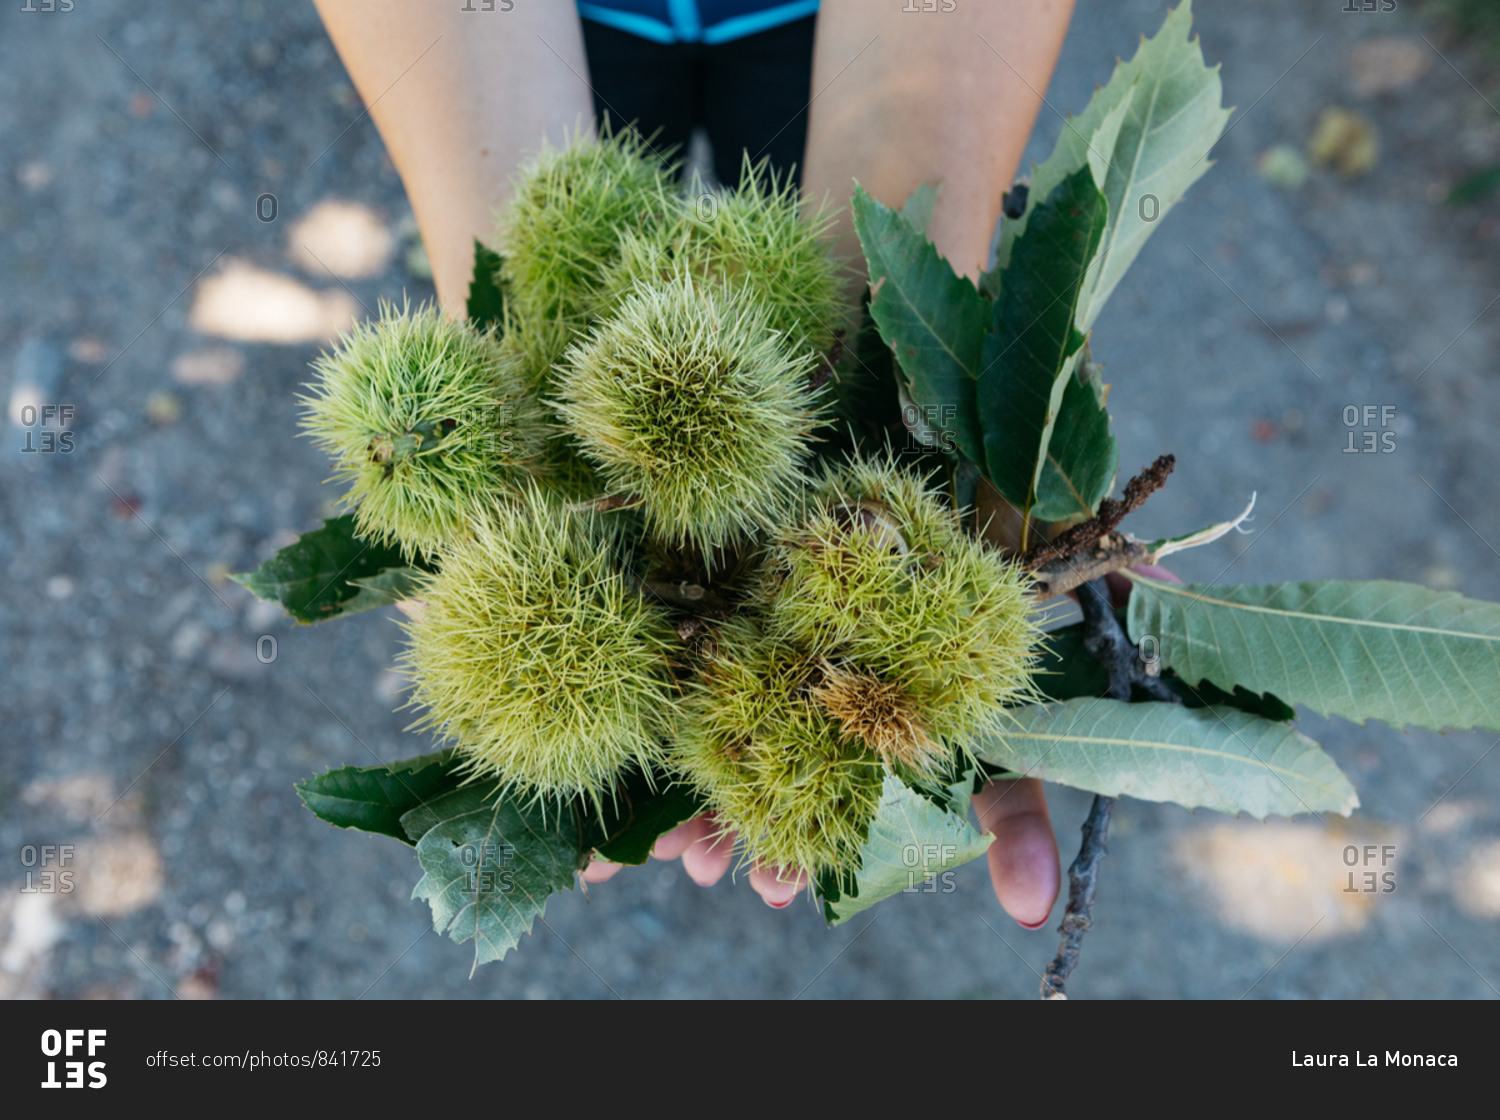 Person holding spiky chestnuts in South Tyrol, Italy